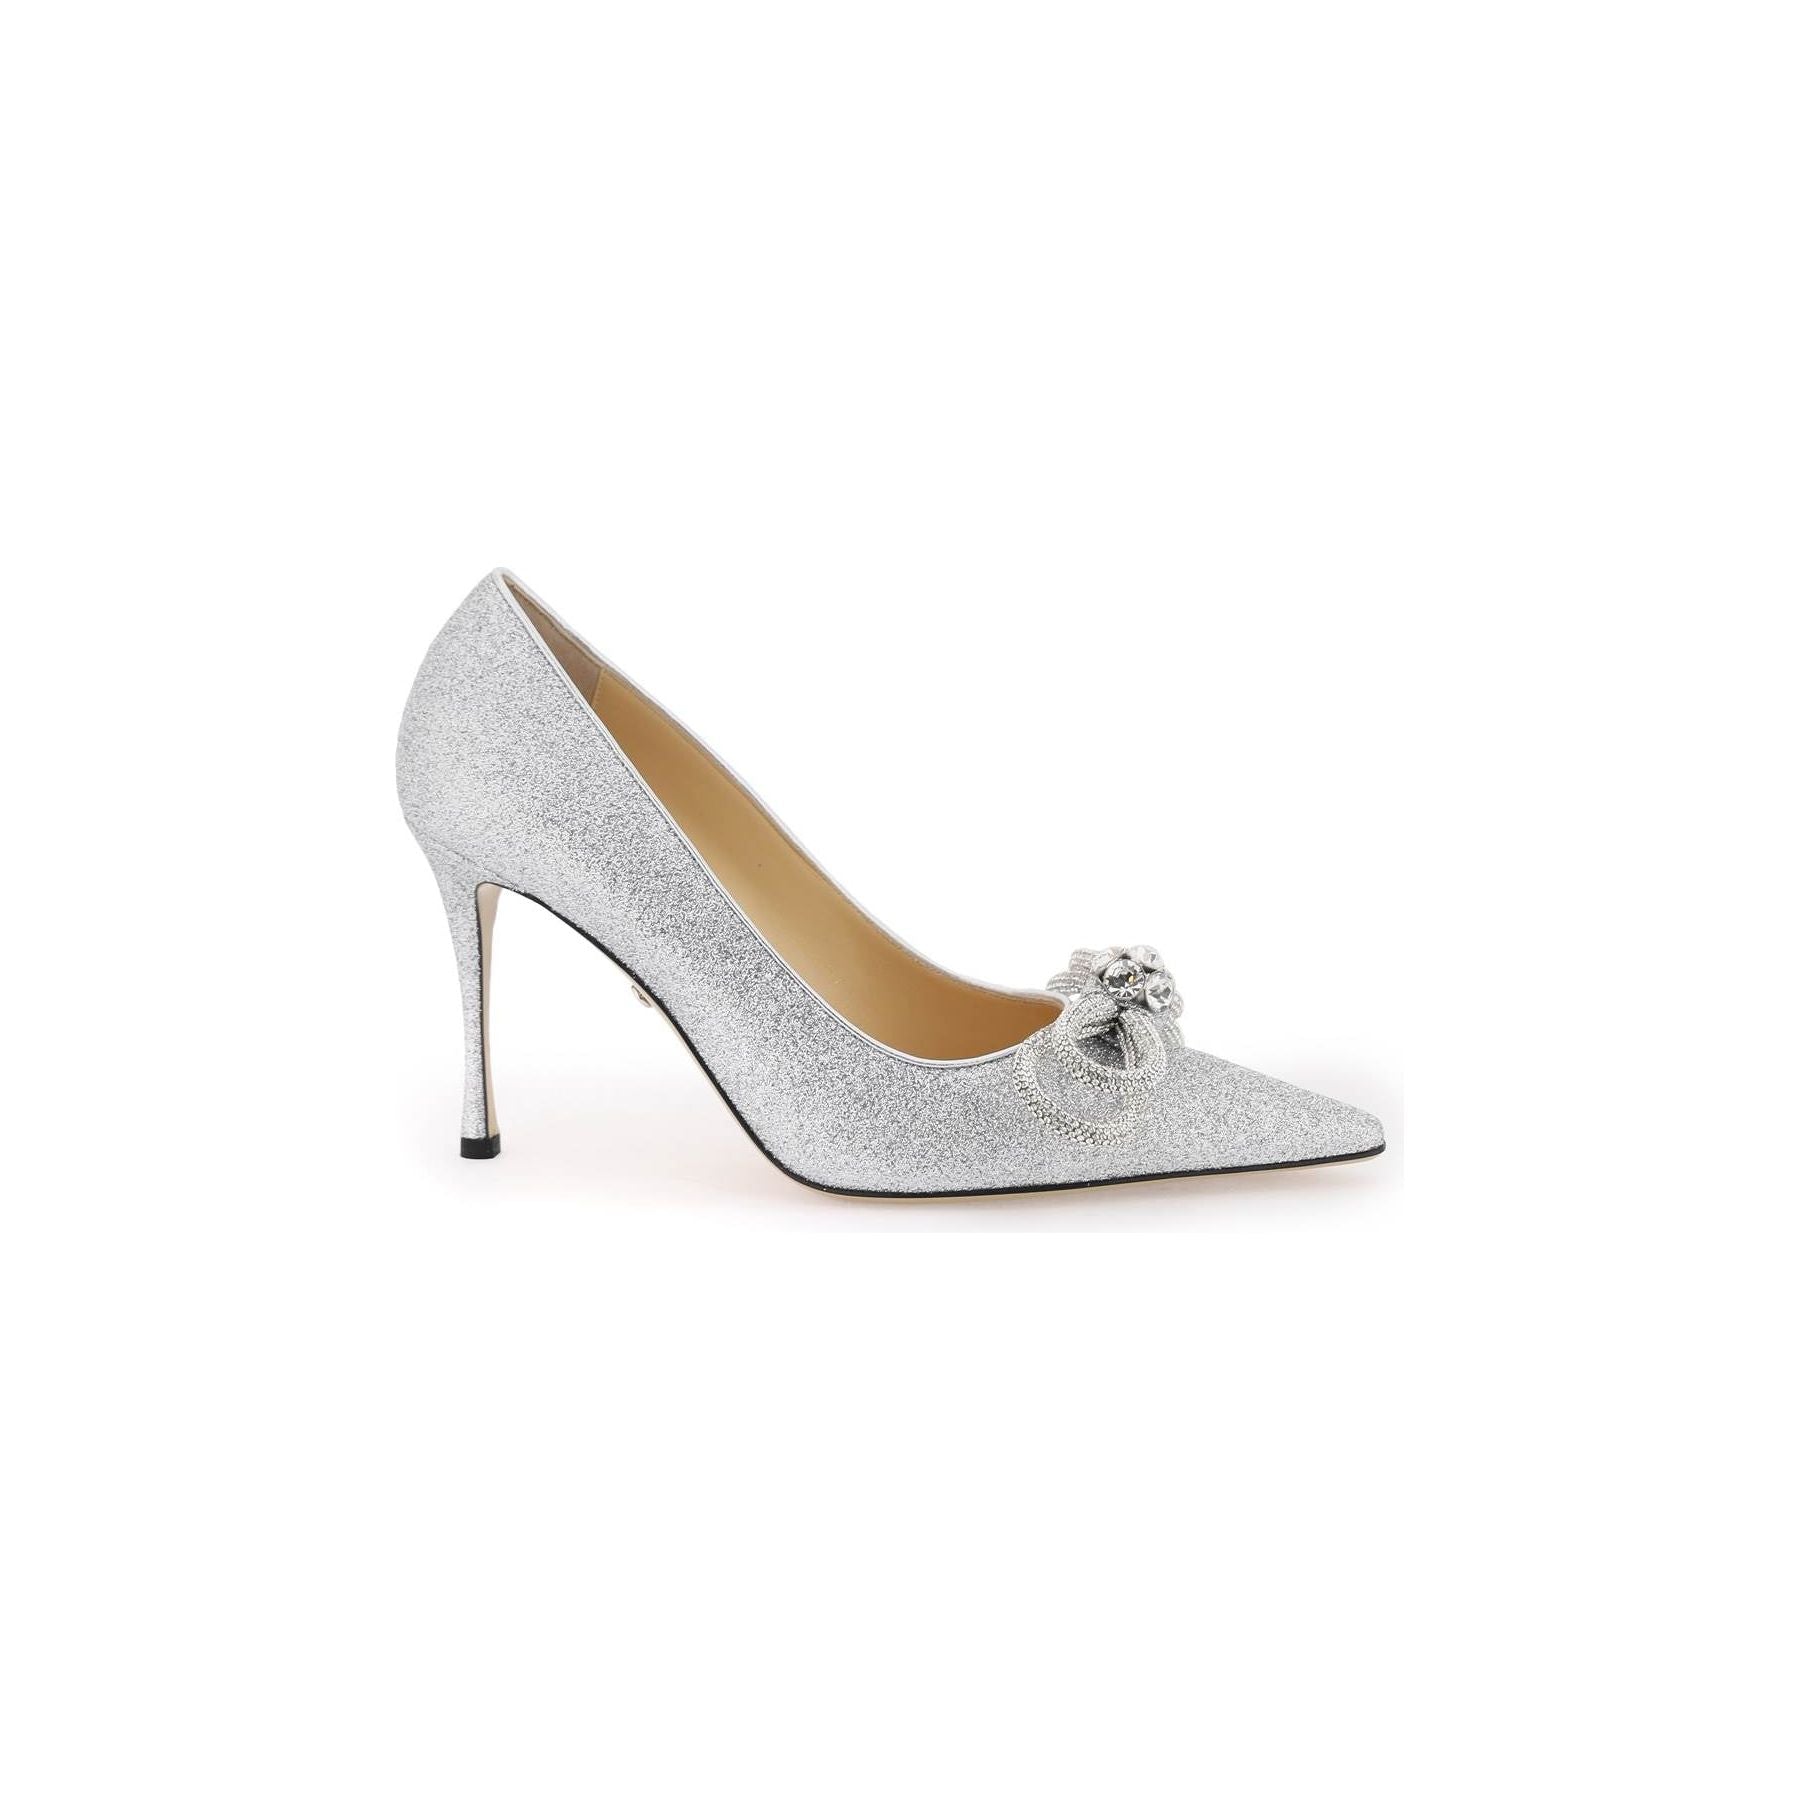 Double-Bow Crystal Glittered Pumps